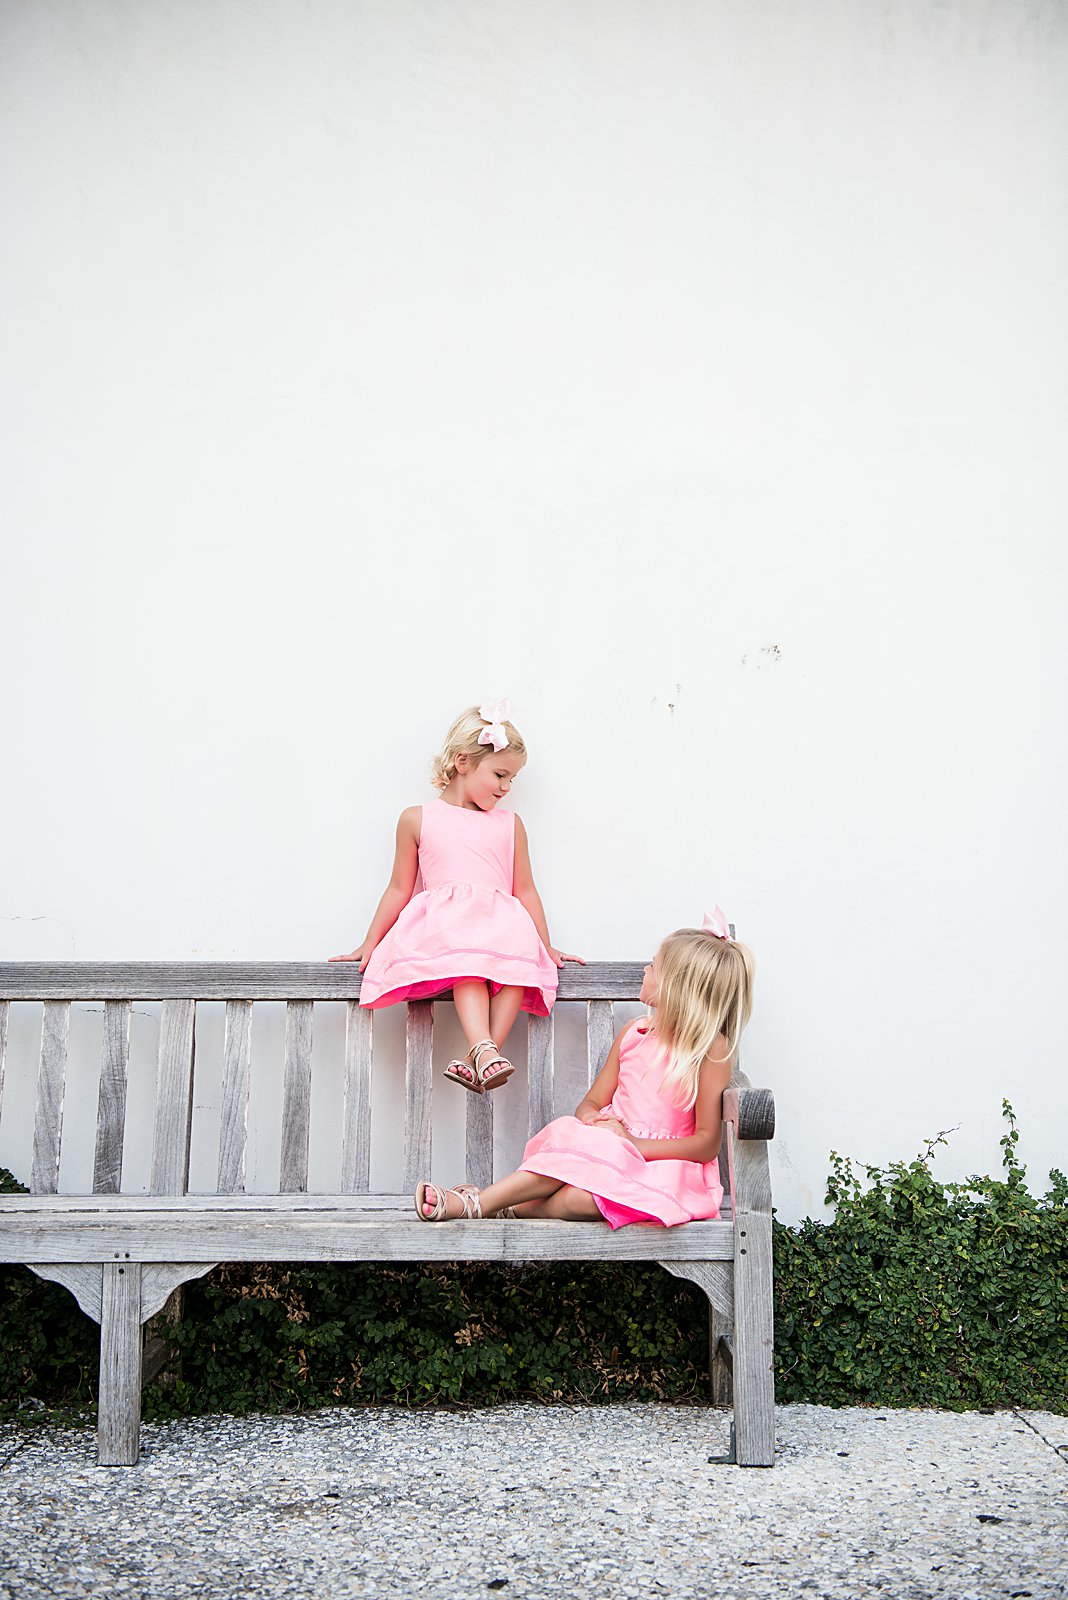 two young girls in pink by the Rosemary Beach Florida Post Office